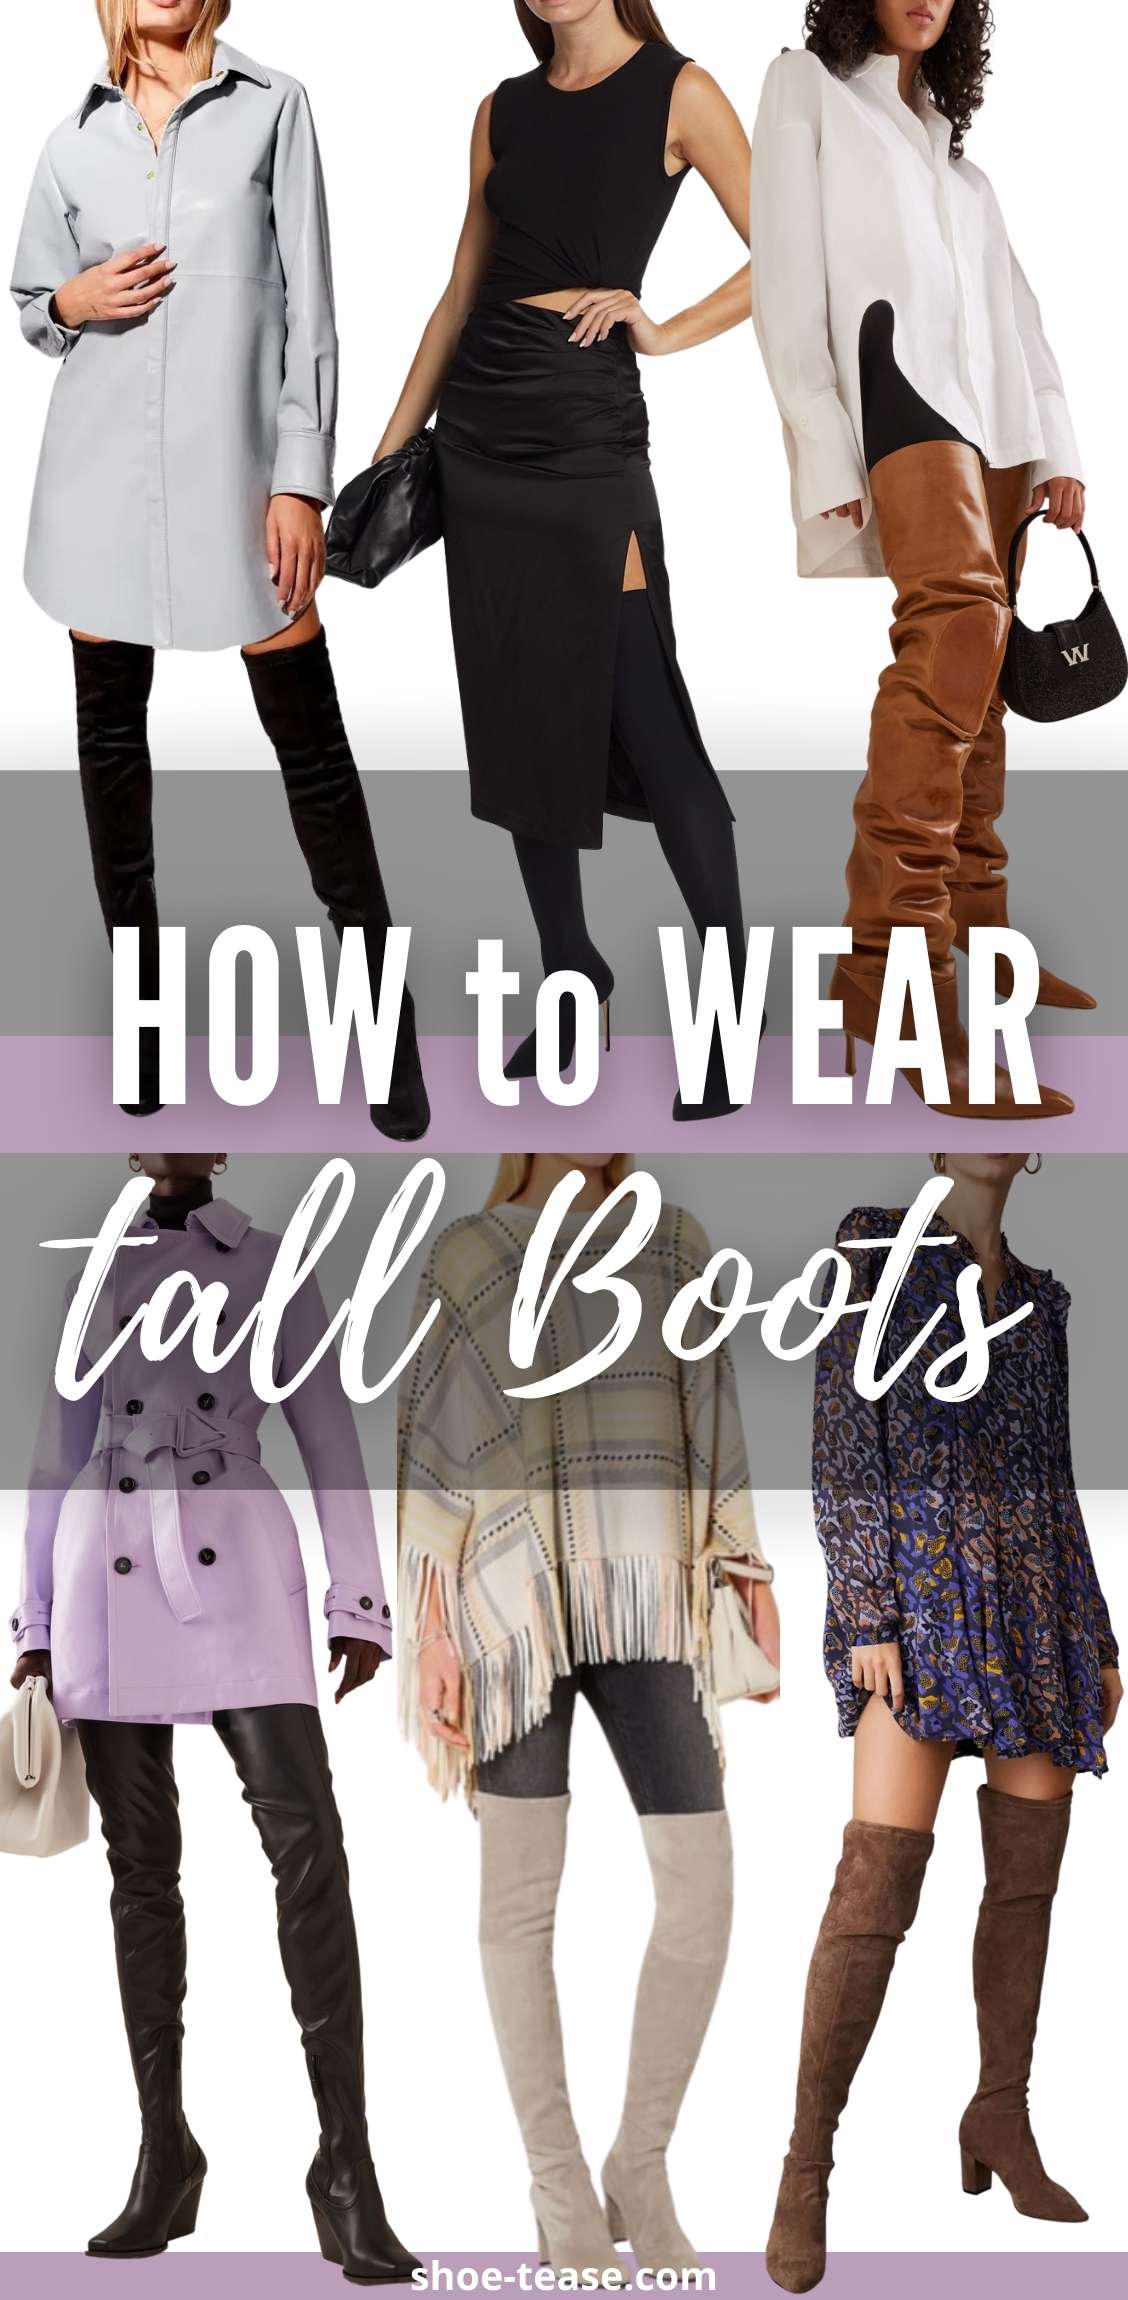 Collage of 6 women wearing different thigh high boots outfits under text reading how to wear tall boots.